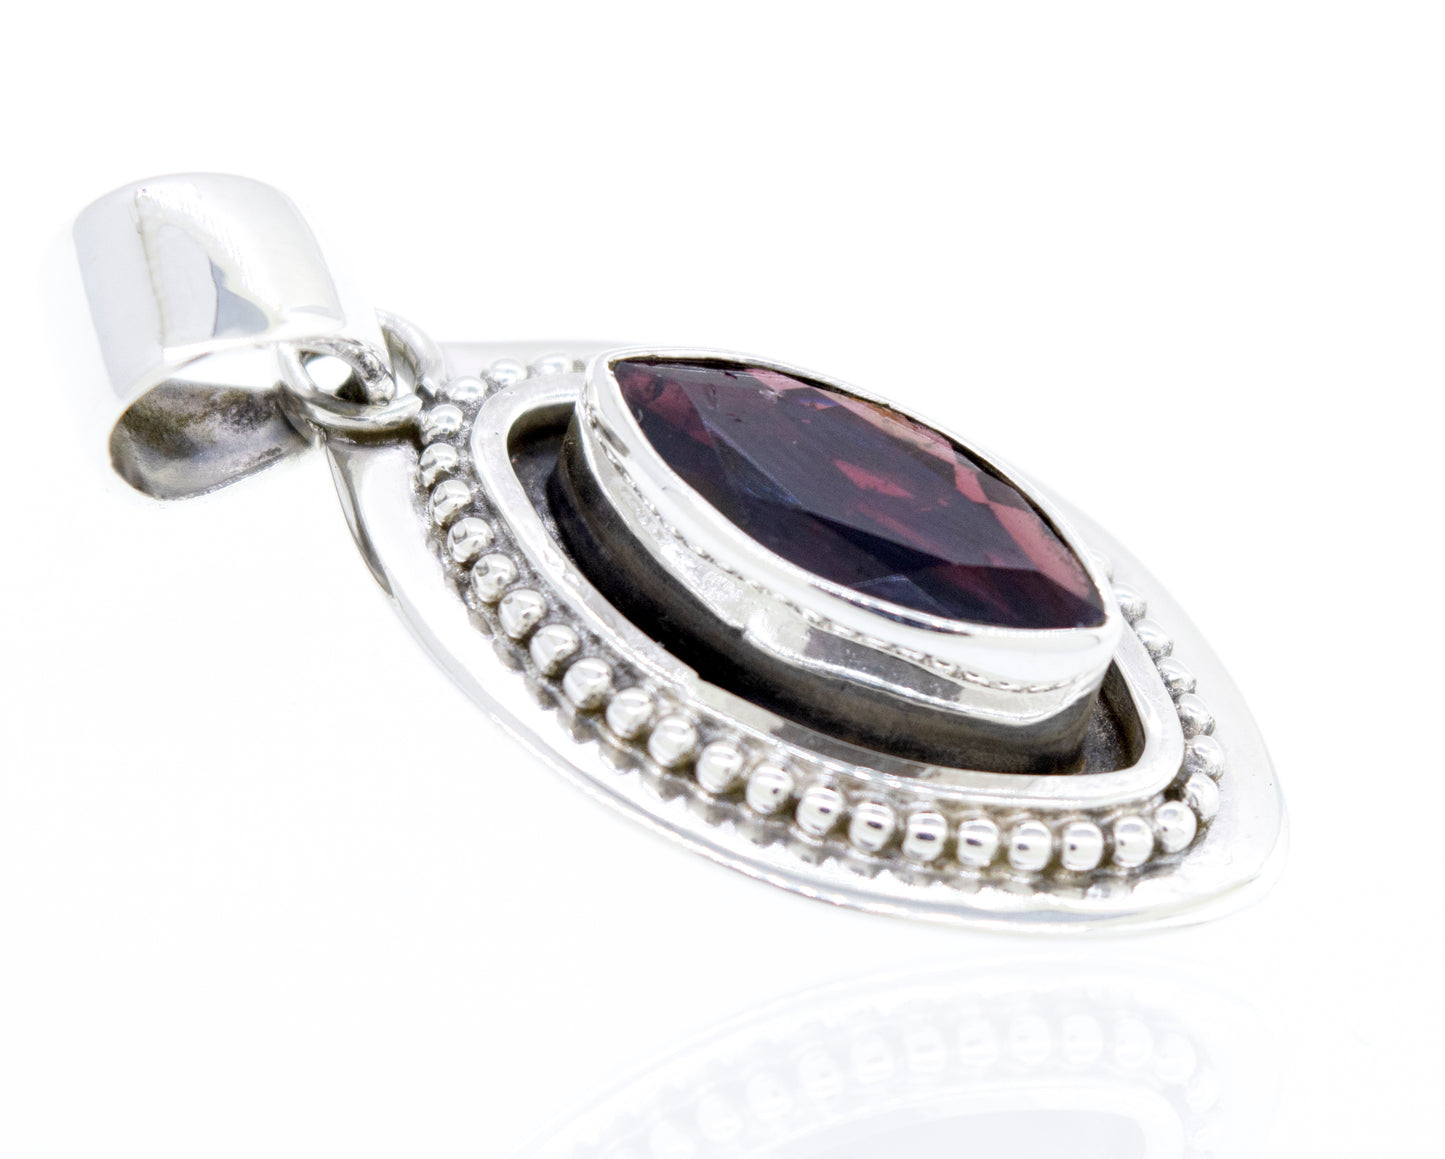 A Super Silver Beautiful Marquise Shaped Garnet Pendant With Beads Design.